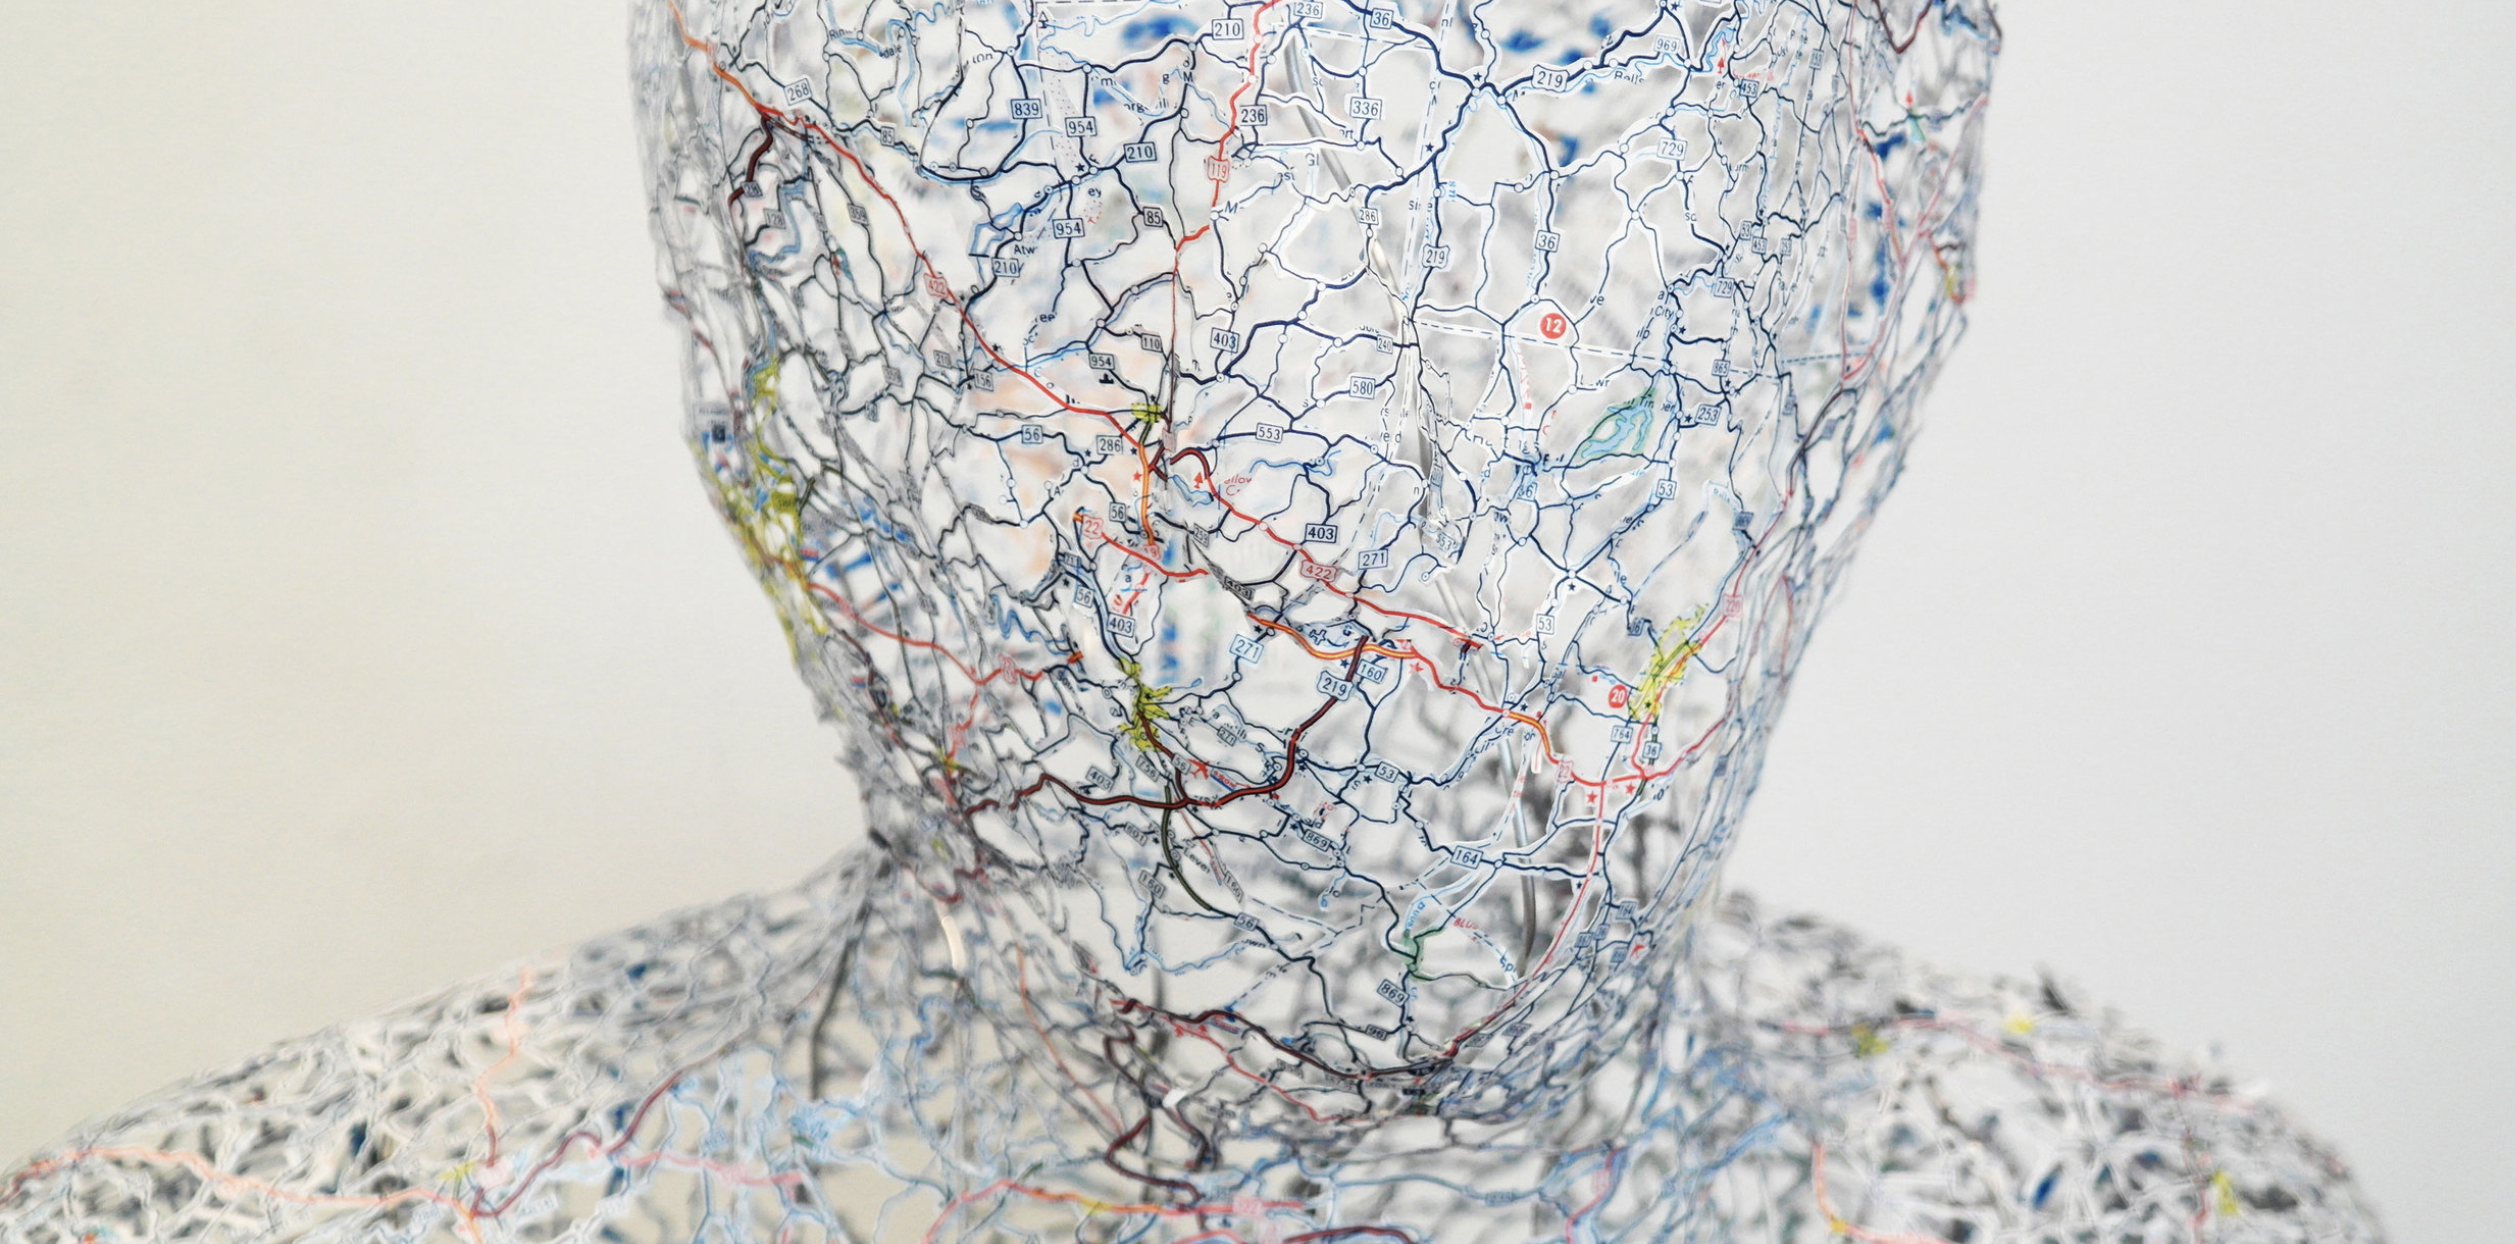 sculpture of a person made from a map by the artist nikki rosato